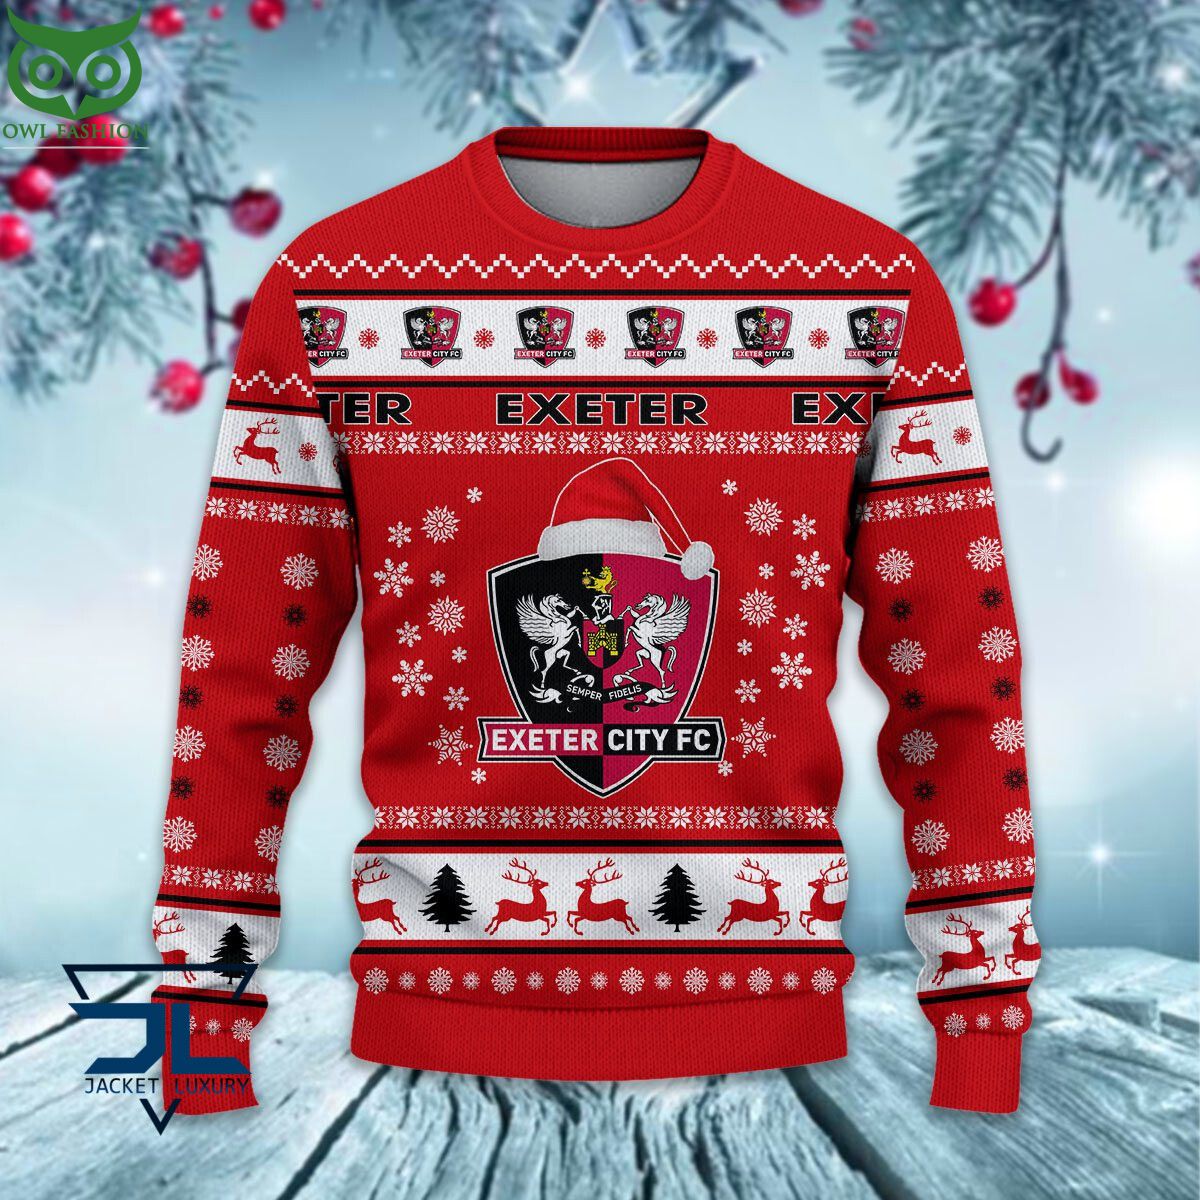 exeter city epl league cup ugly sweater 2 vBLQs.jpg